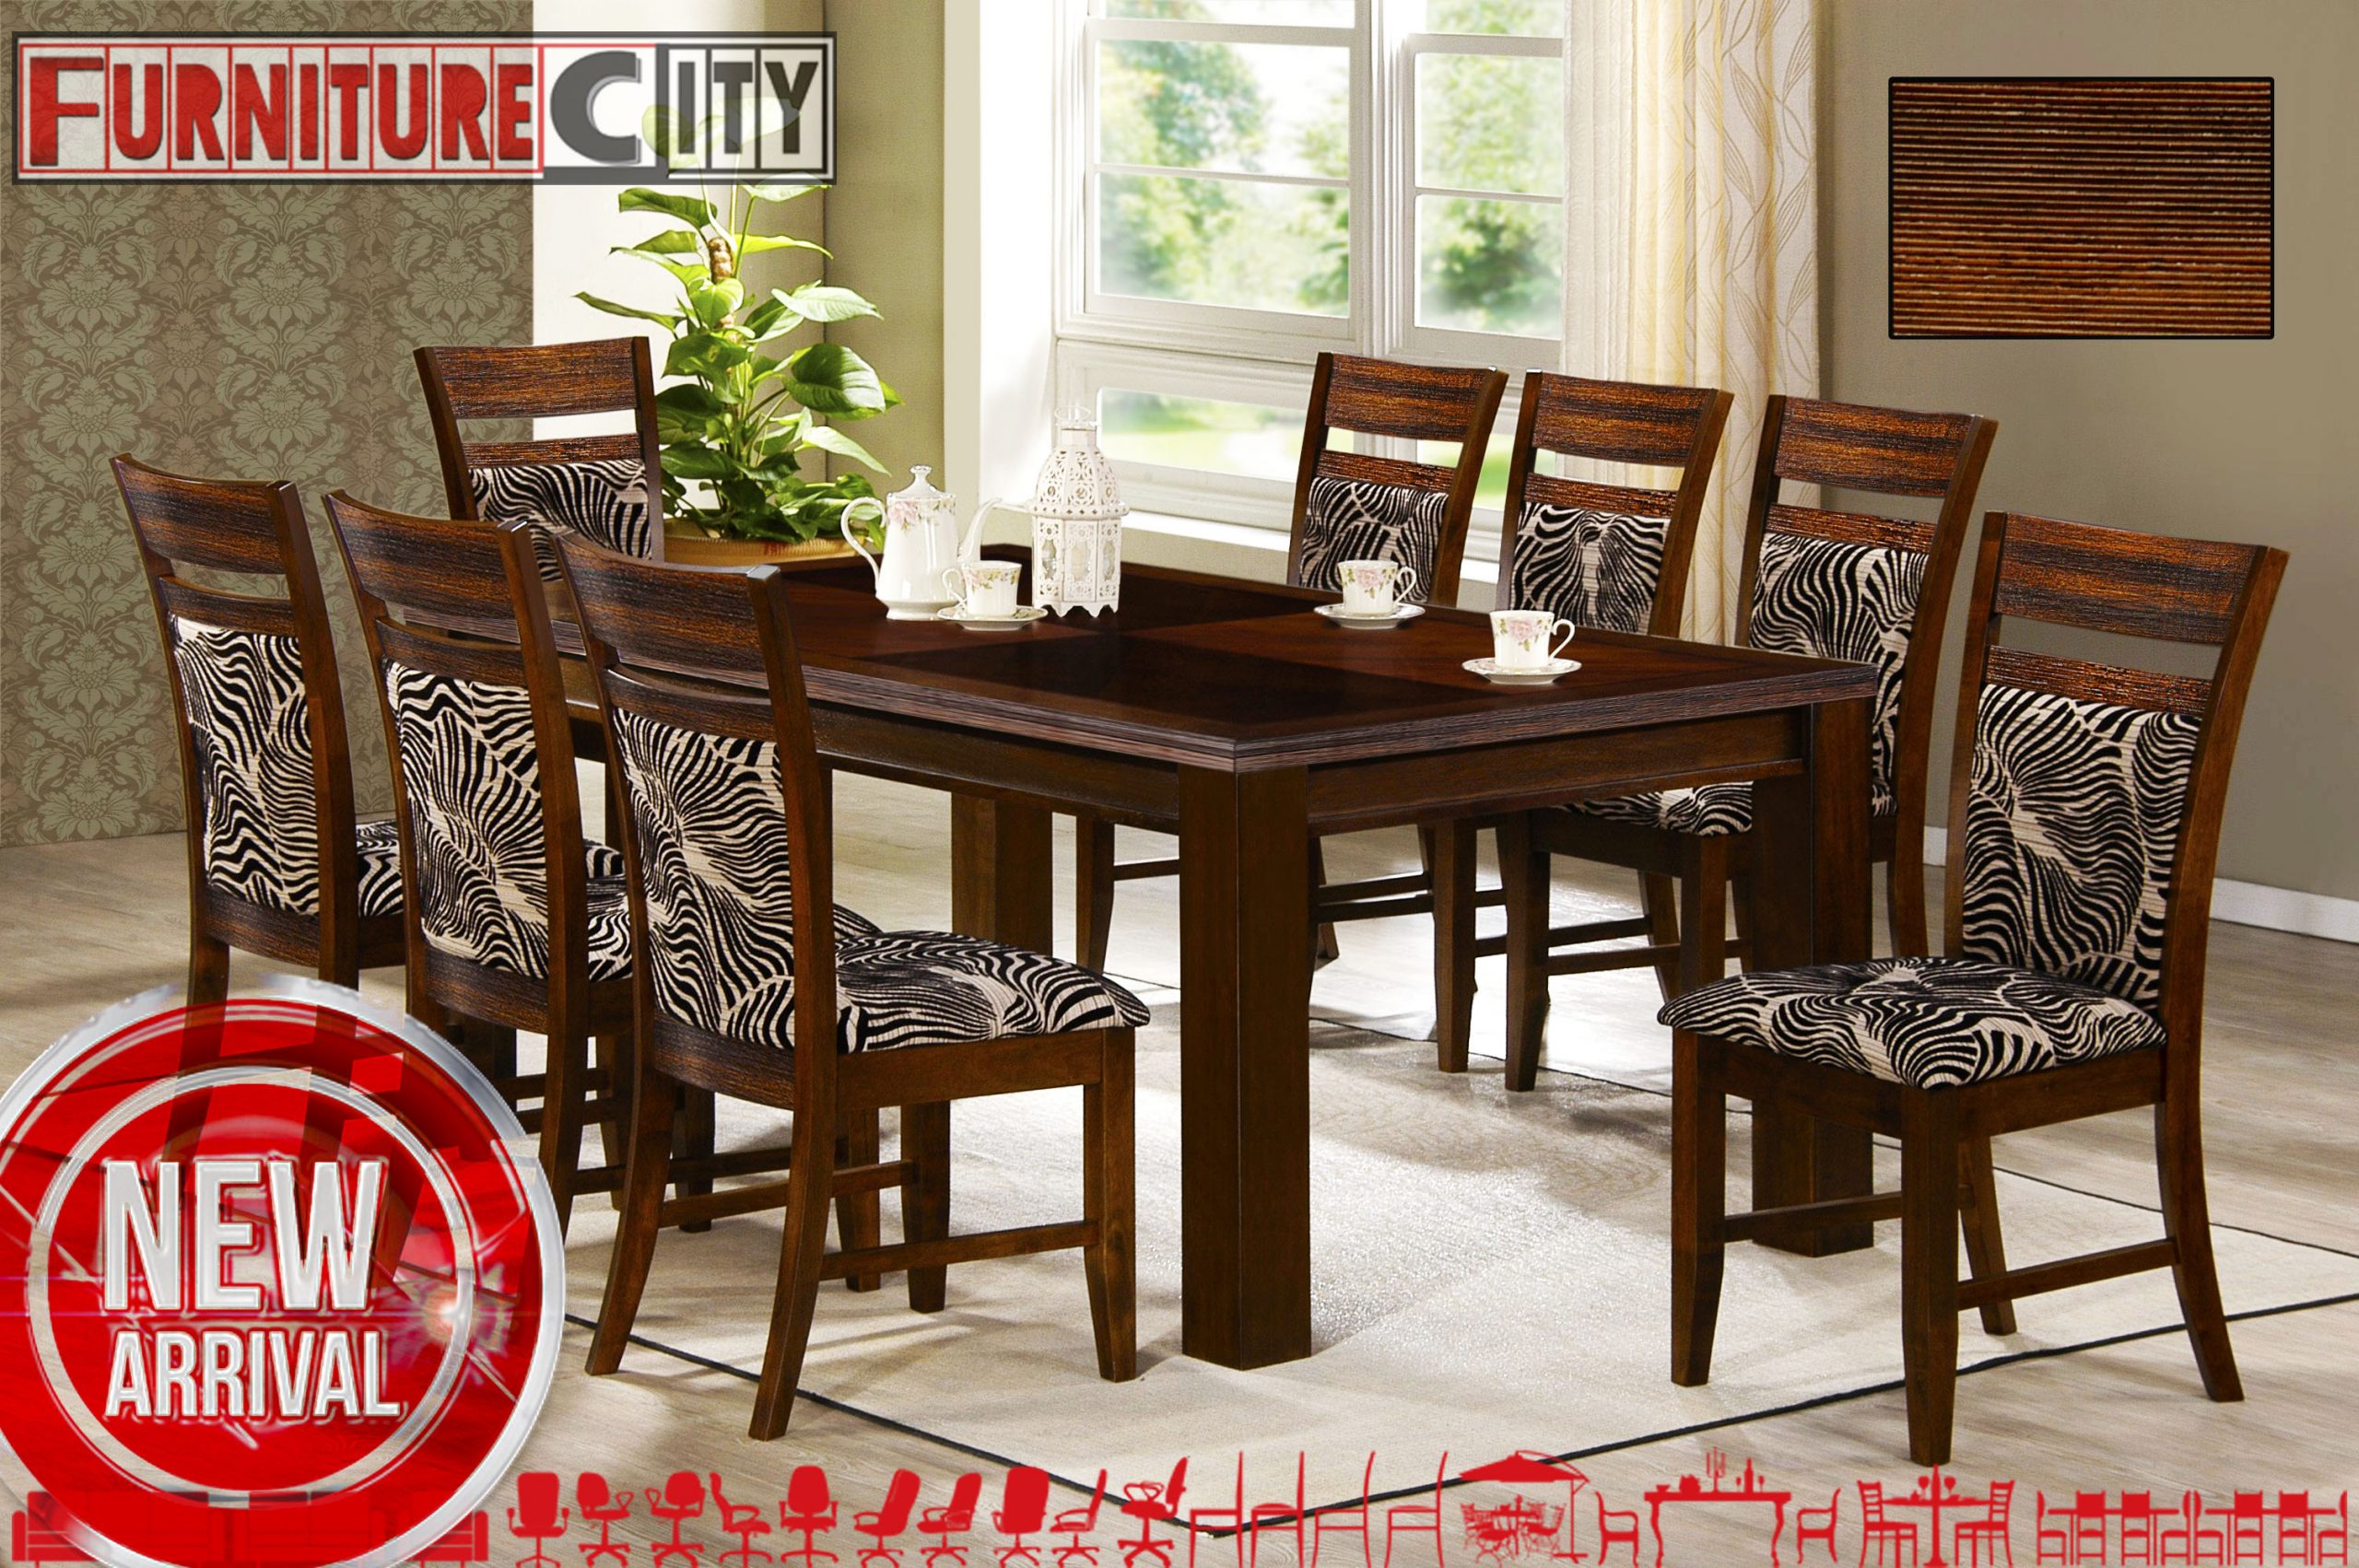 Furniture City Ghana New Arrivals Dining Sets pertaining to dimensions 3008 X 2000